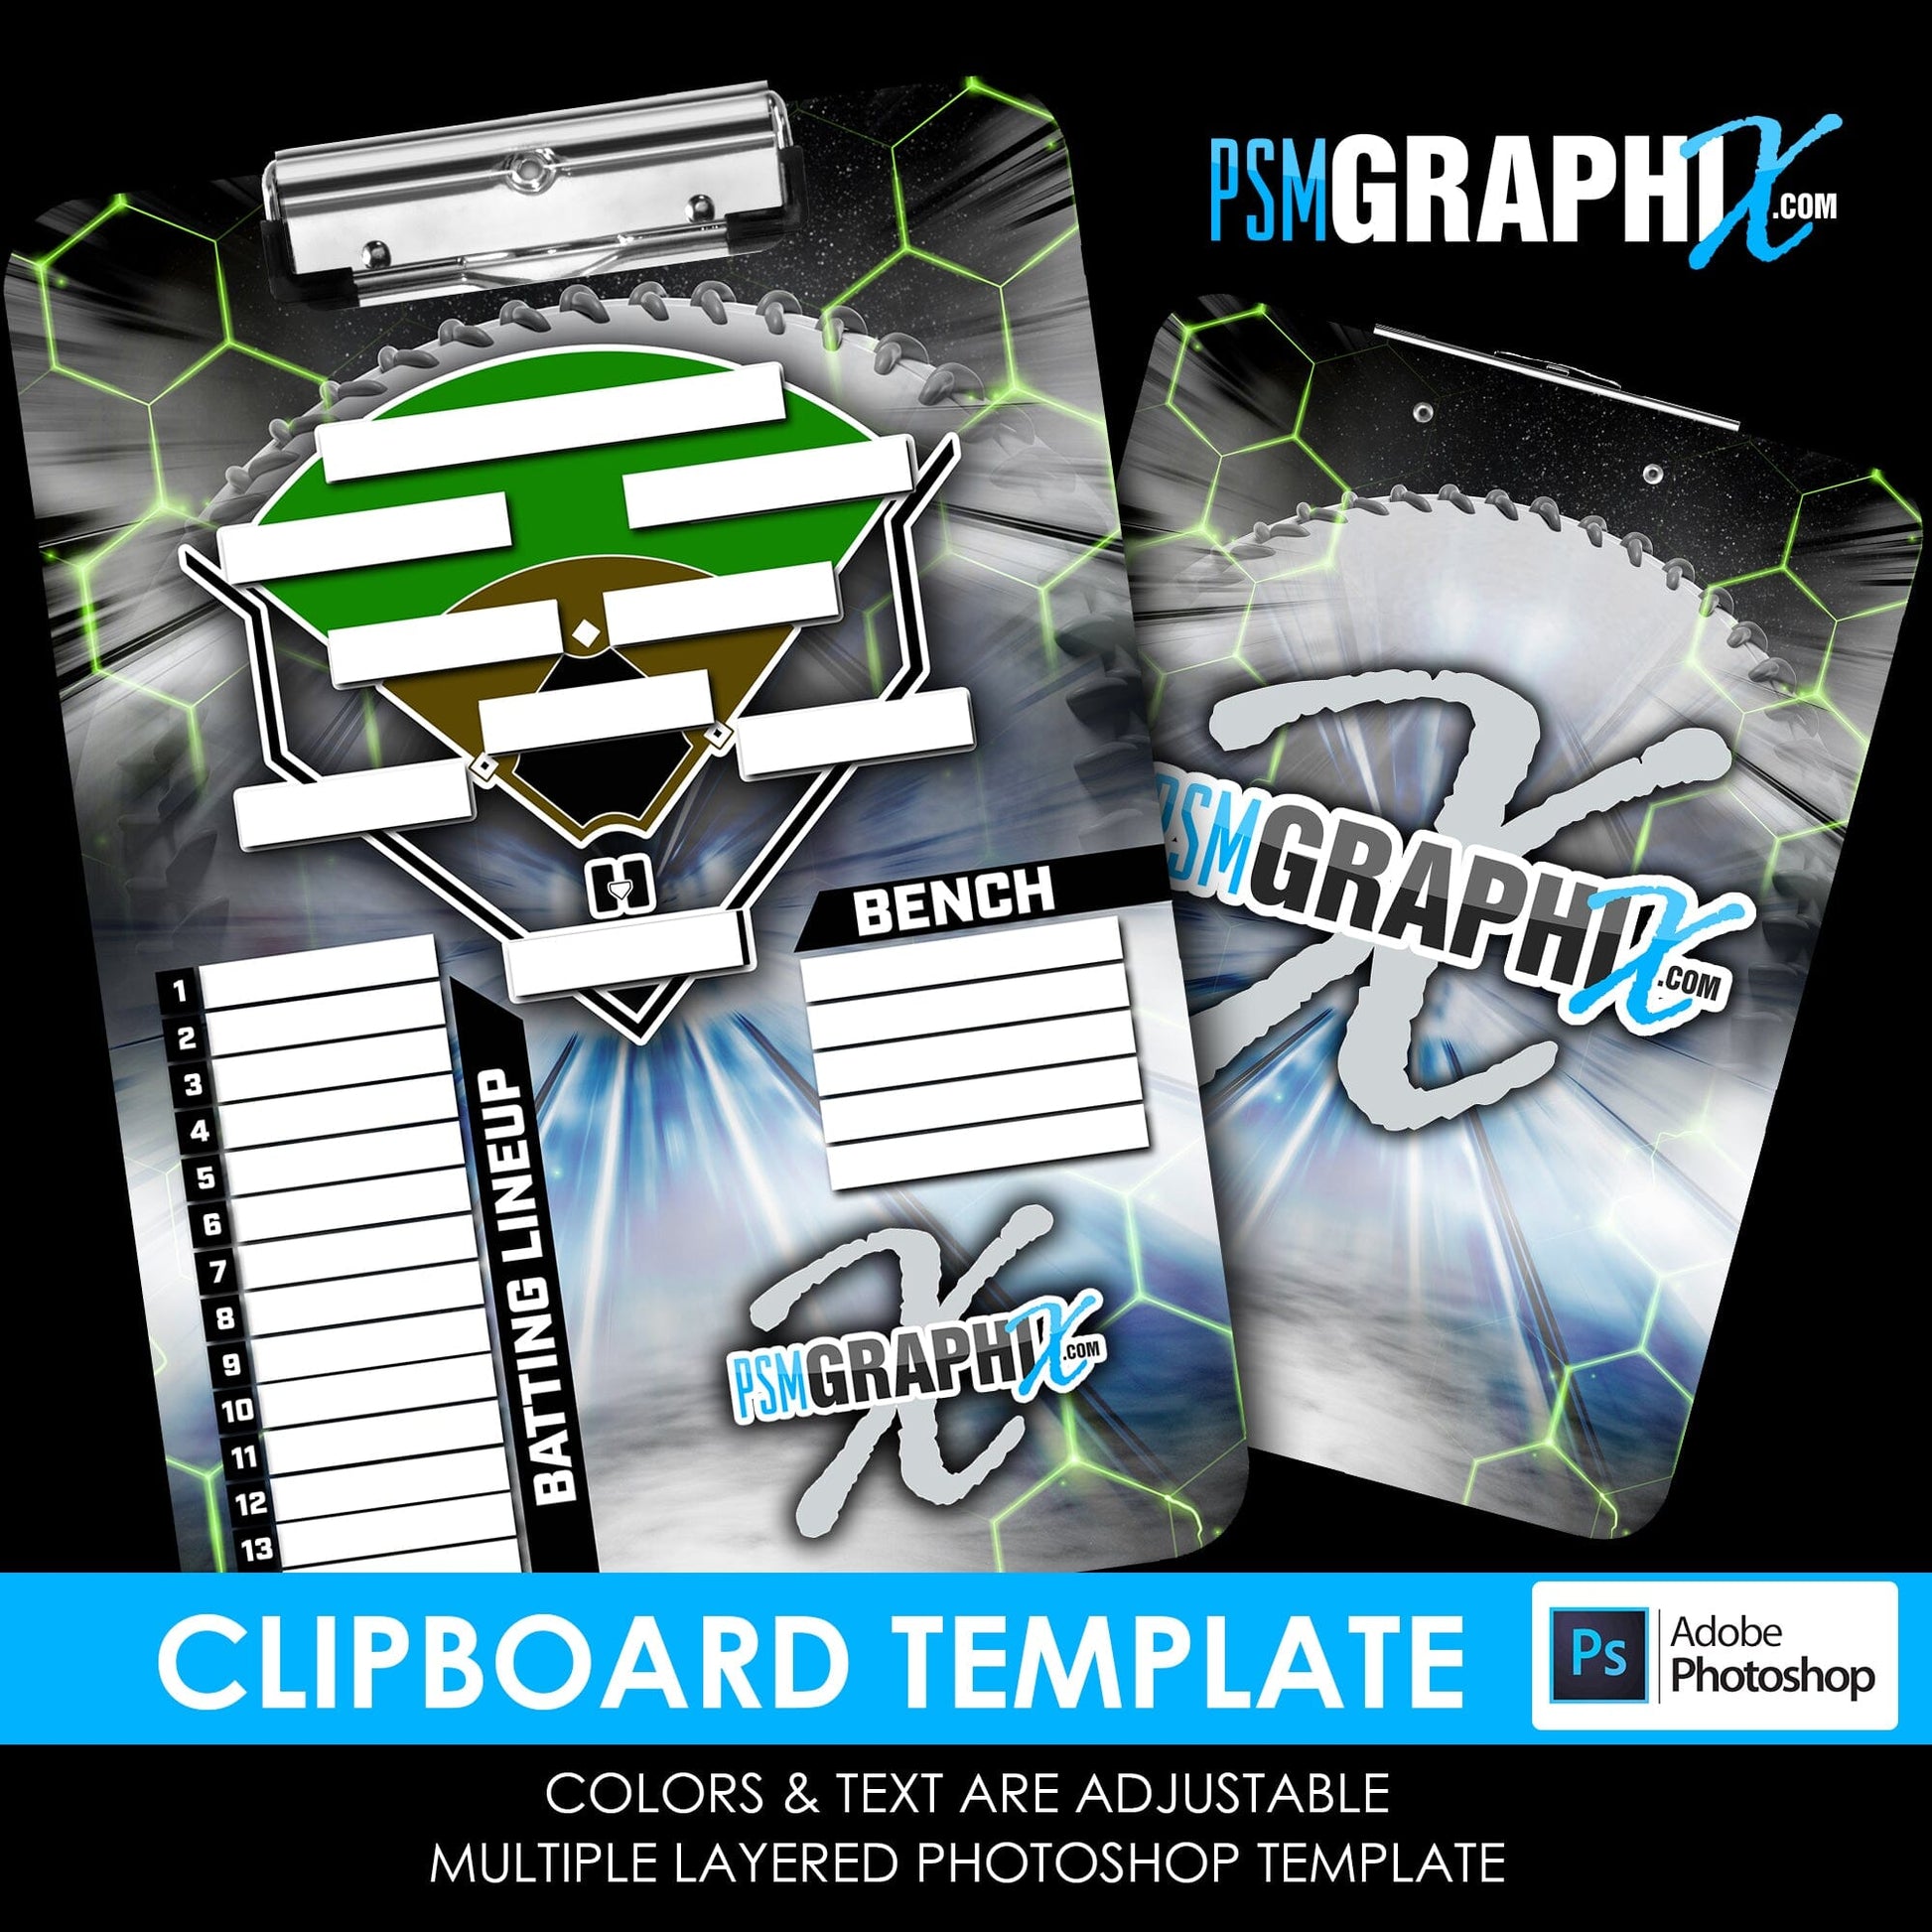 Cinema Series - Game Time Clipboard - Photoshop Template-Photoshop Template - PSMGraphix